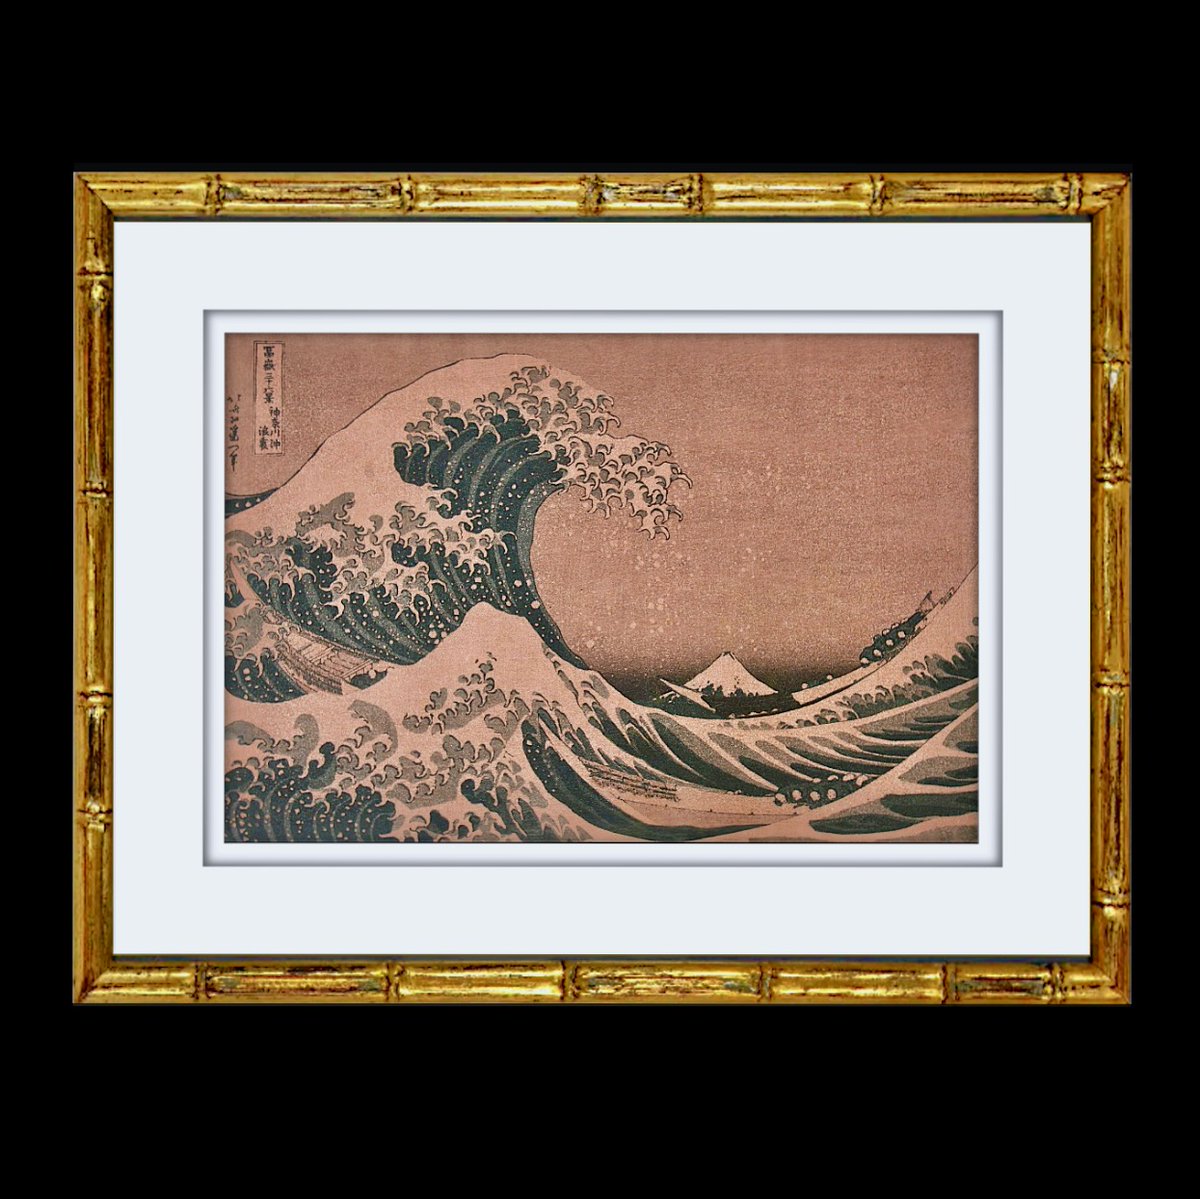 🔥 For Sale 🌈  Original Japanese Woodblock Print Tsunami Great Wave By Hokusai. The direct link is below...

busaccagallery.com/catalog.php?it…

🔥 See the description video and interesting details at Busacca Gallery

#Print #WoodBlock #WoodblockPrints #OriginalPrint #BusaccaGallery #Art